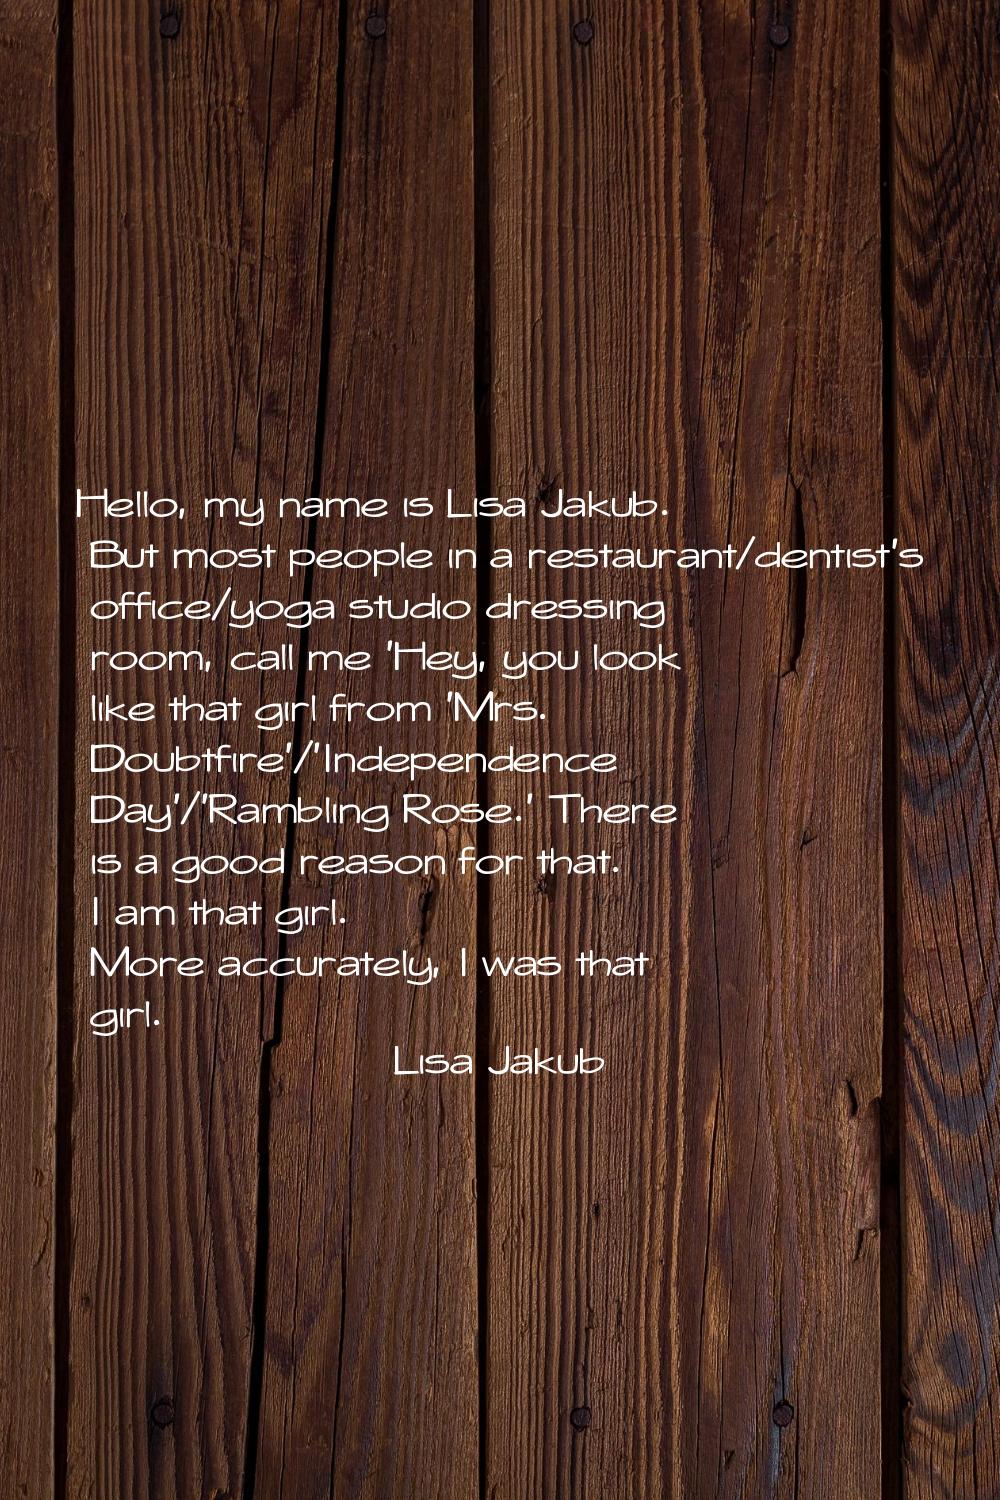 Hello, my name is Lisa Jakub. But most people in a restaurant/dentist's office/yoga studio dressing